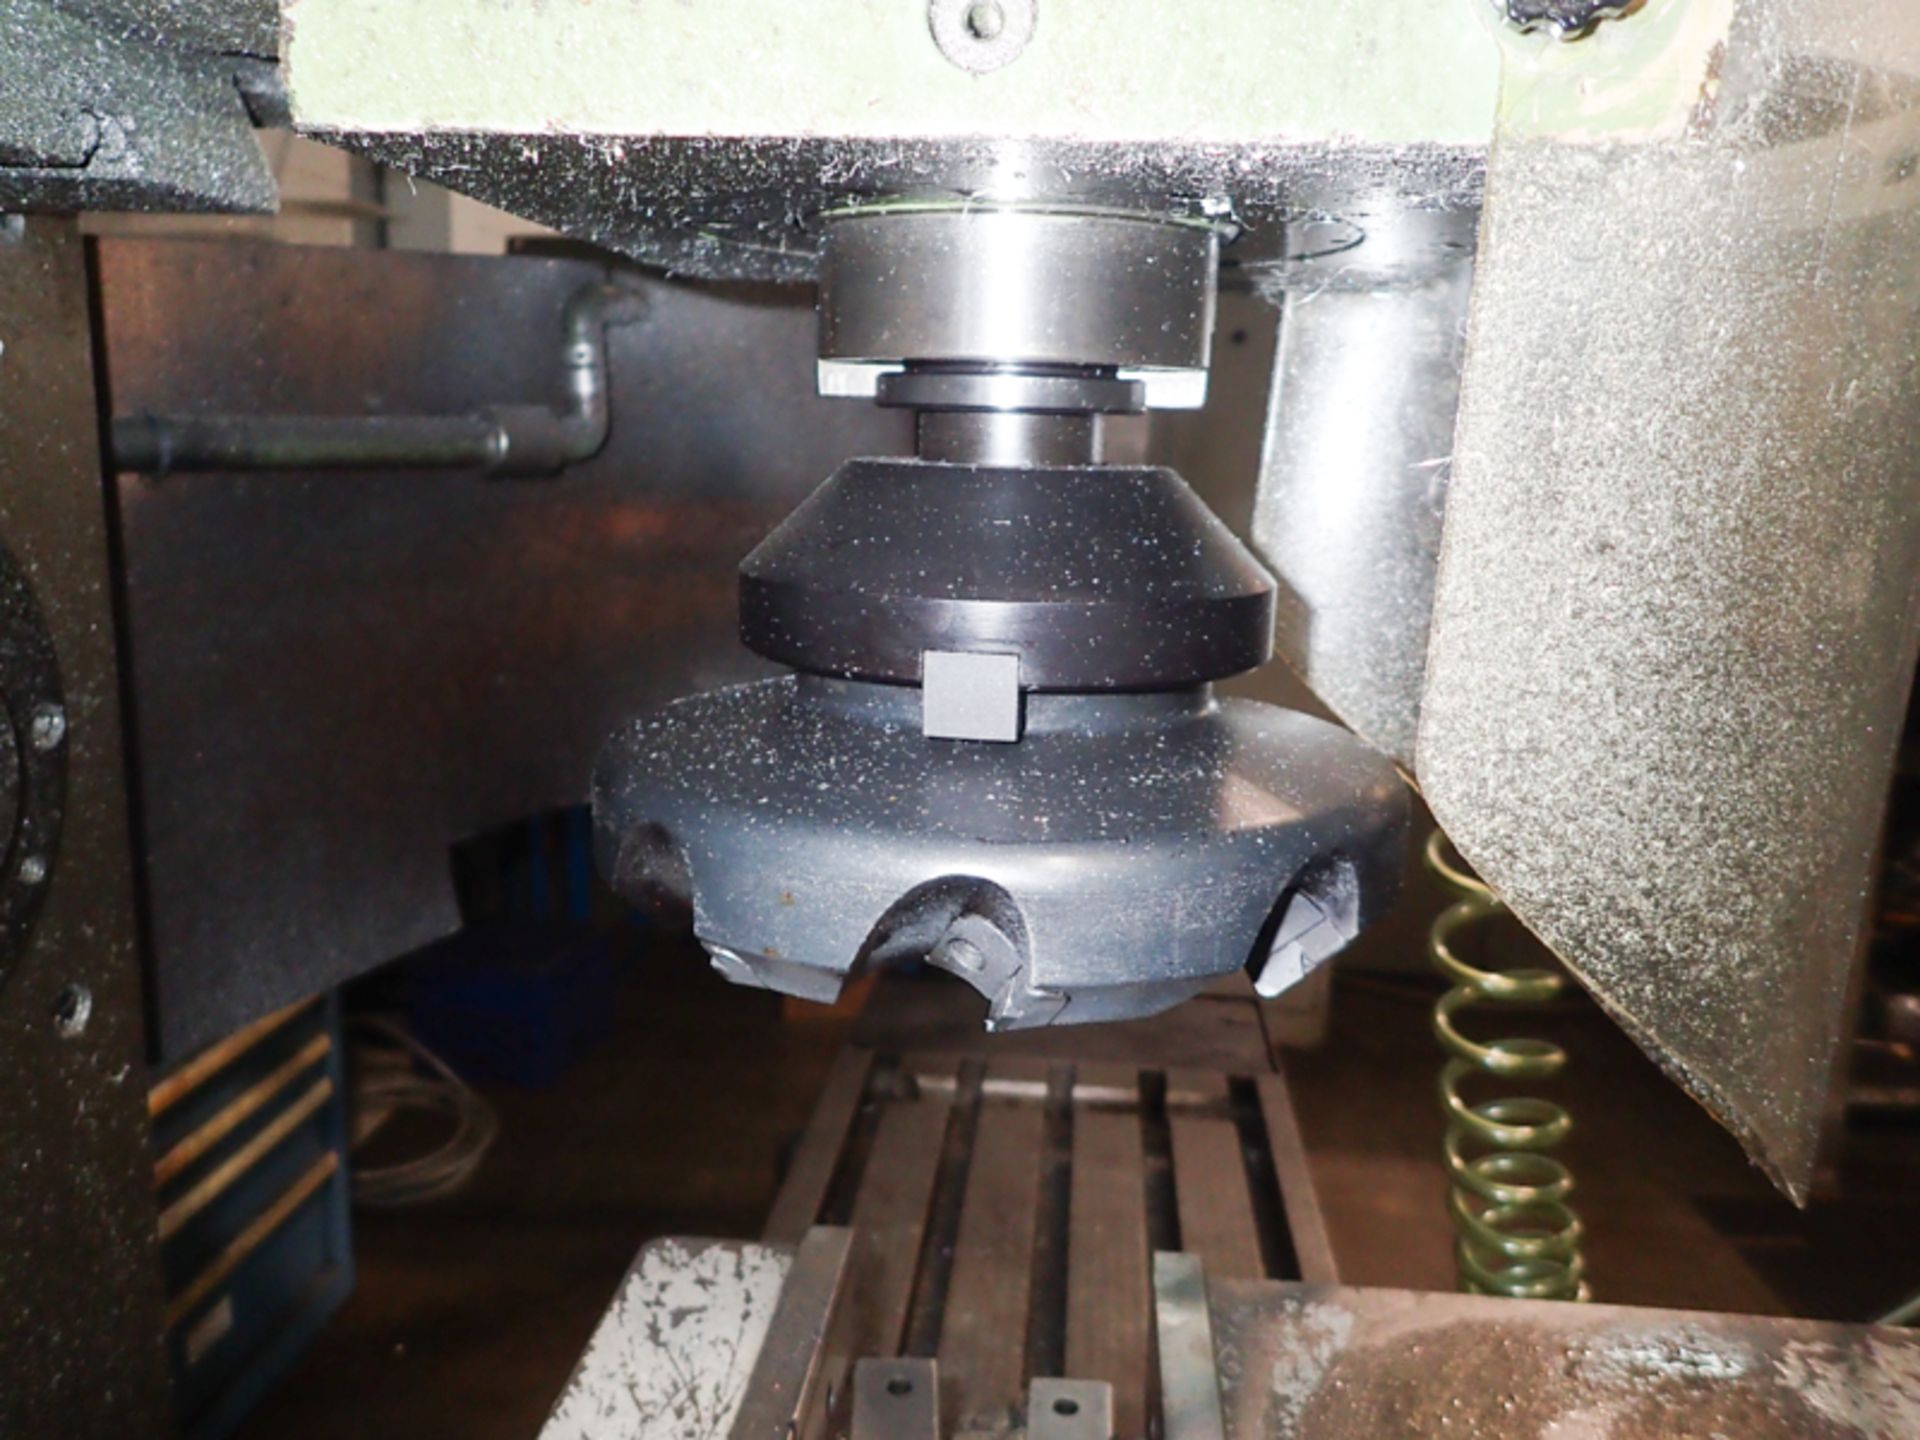 JAFO POWERED OVERARM UNIVERSAL MILL MOD. FWF32J, 12" X 50" TABLE, 8" MILLING VISE, 56-1800 RPM, - Image 3 of 4